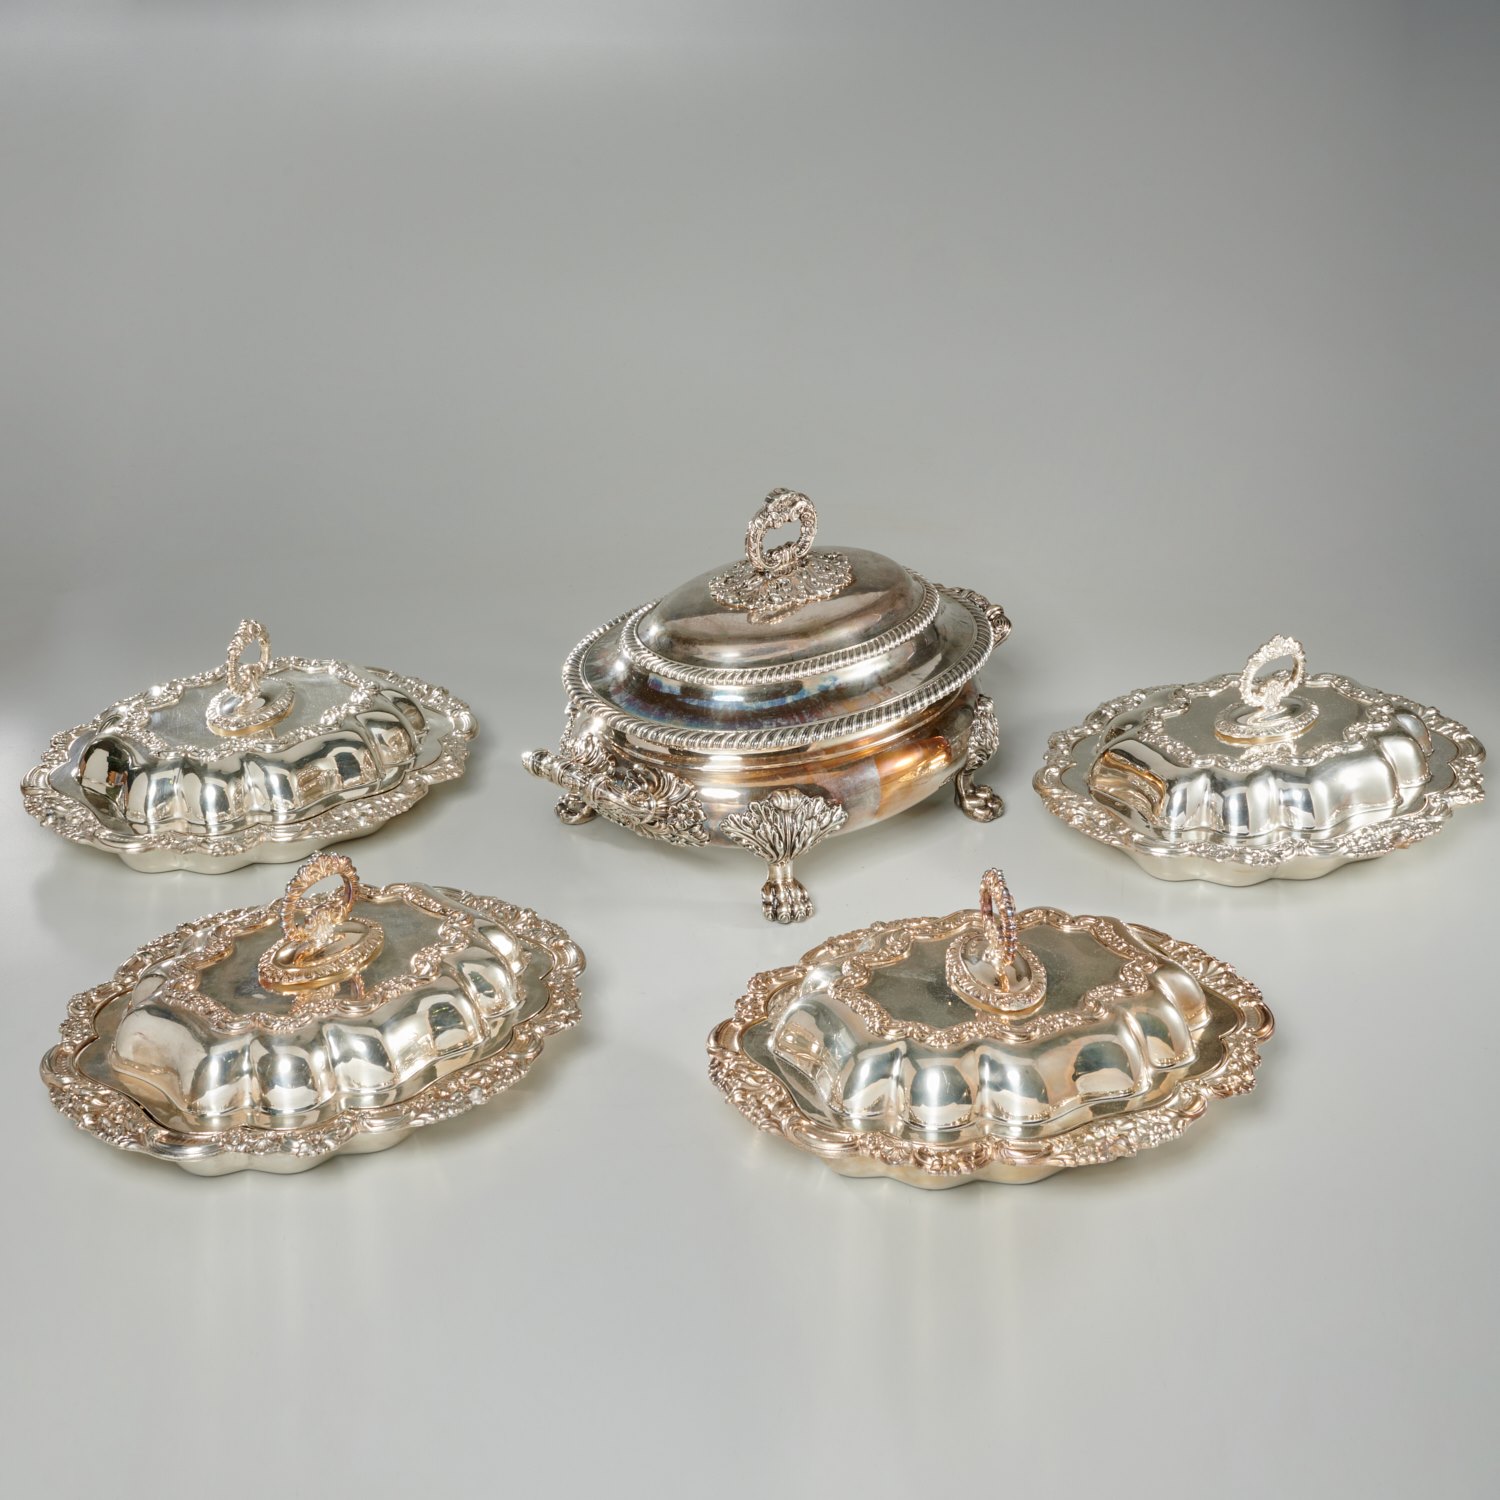  5 ANTIQUE ENGLISH SILVER PLATED 361d1b